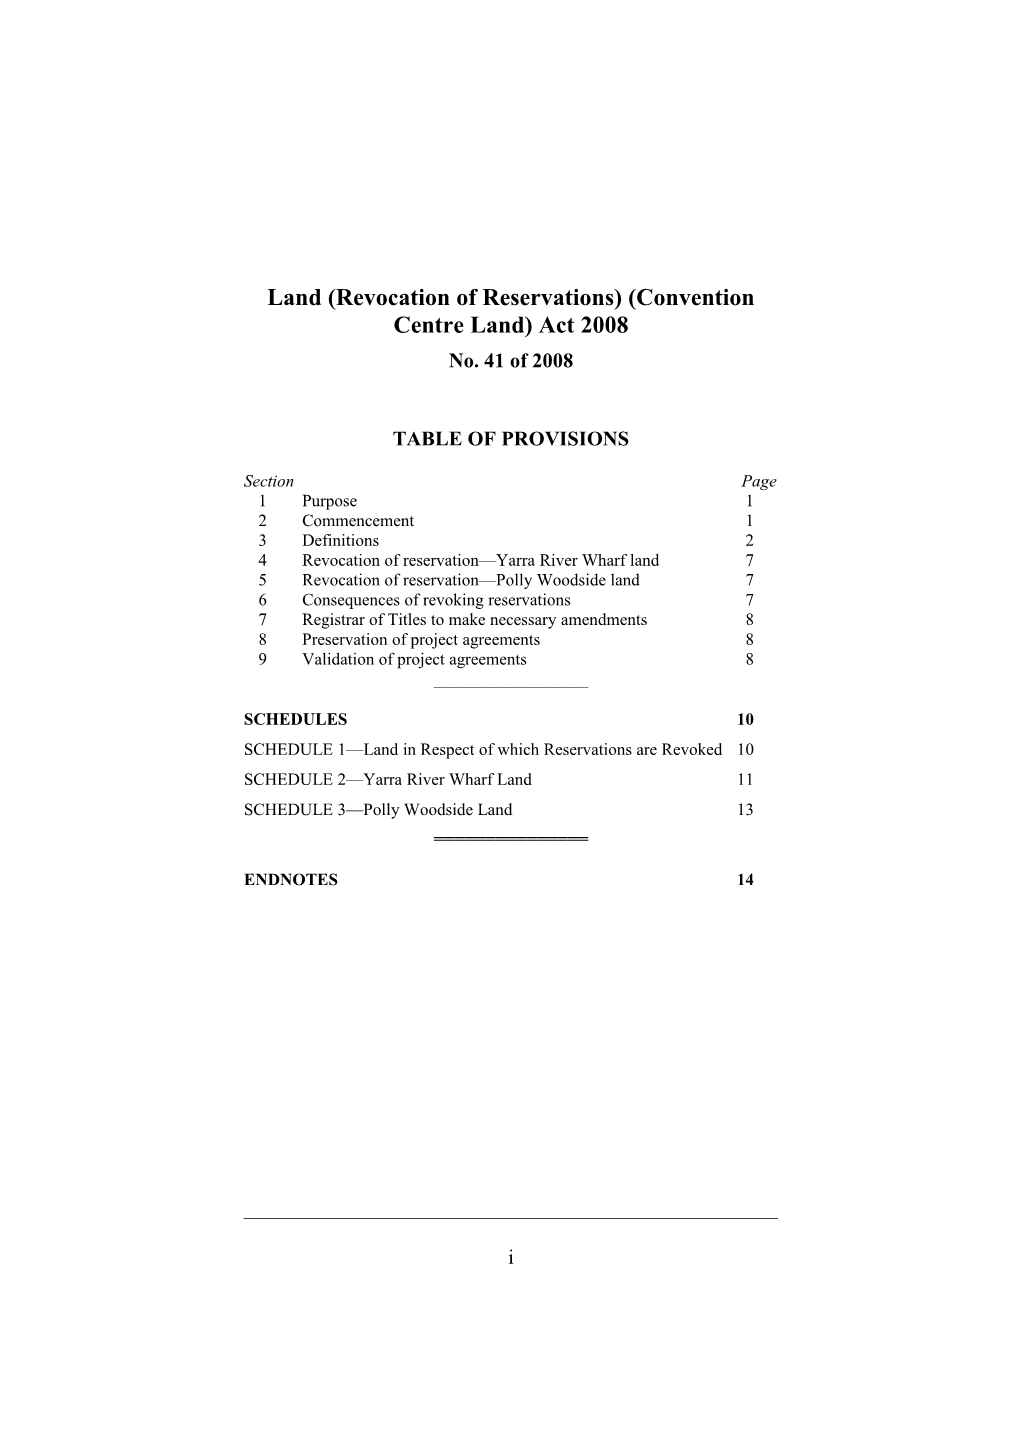 Land (Revocation of Reservations) (Convention Centre Land) Act 2008